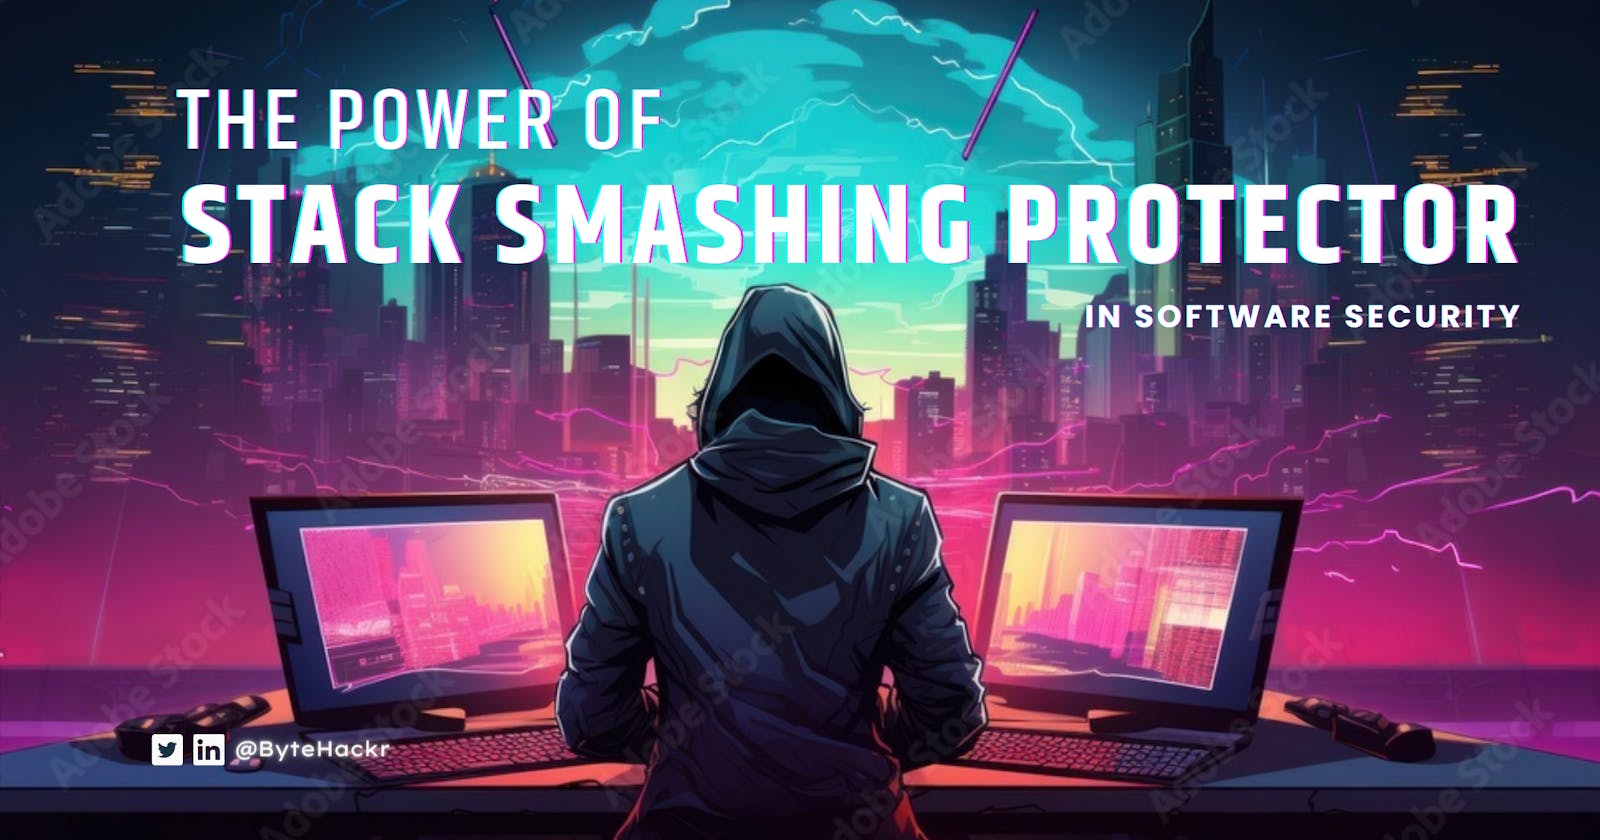 The Power of Stack Smashing Protector (SSP) in Software Security